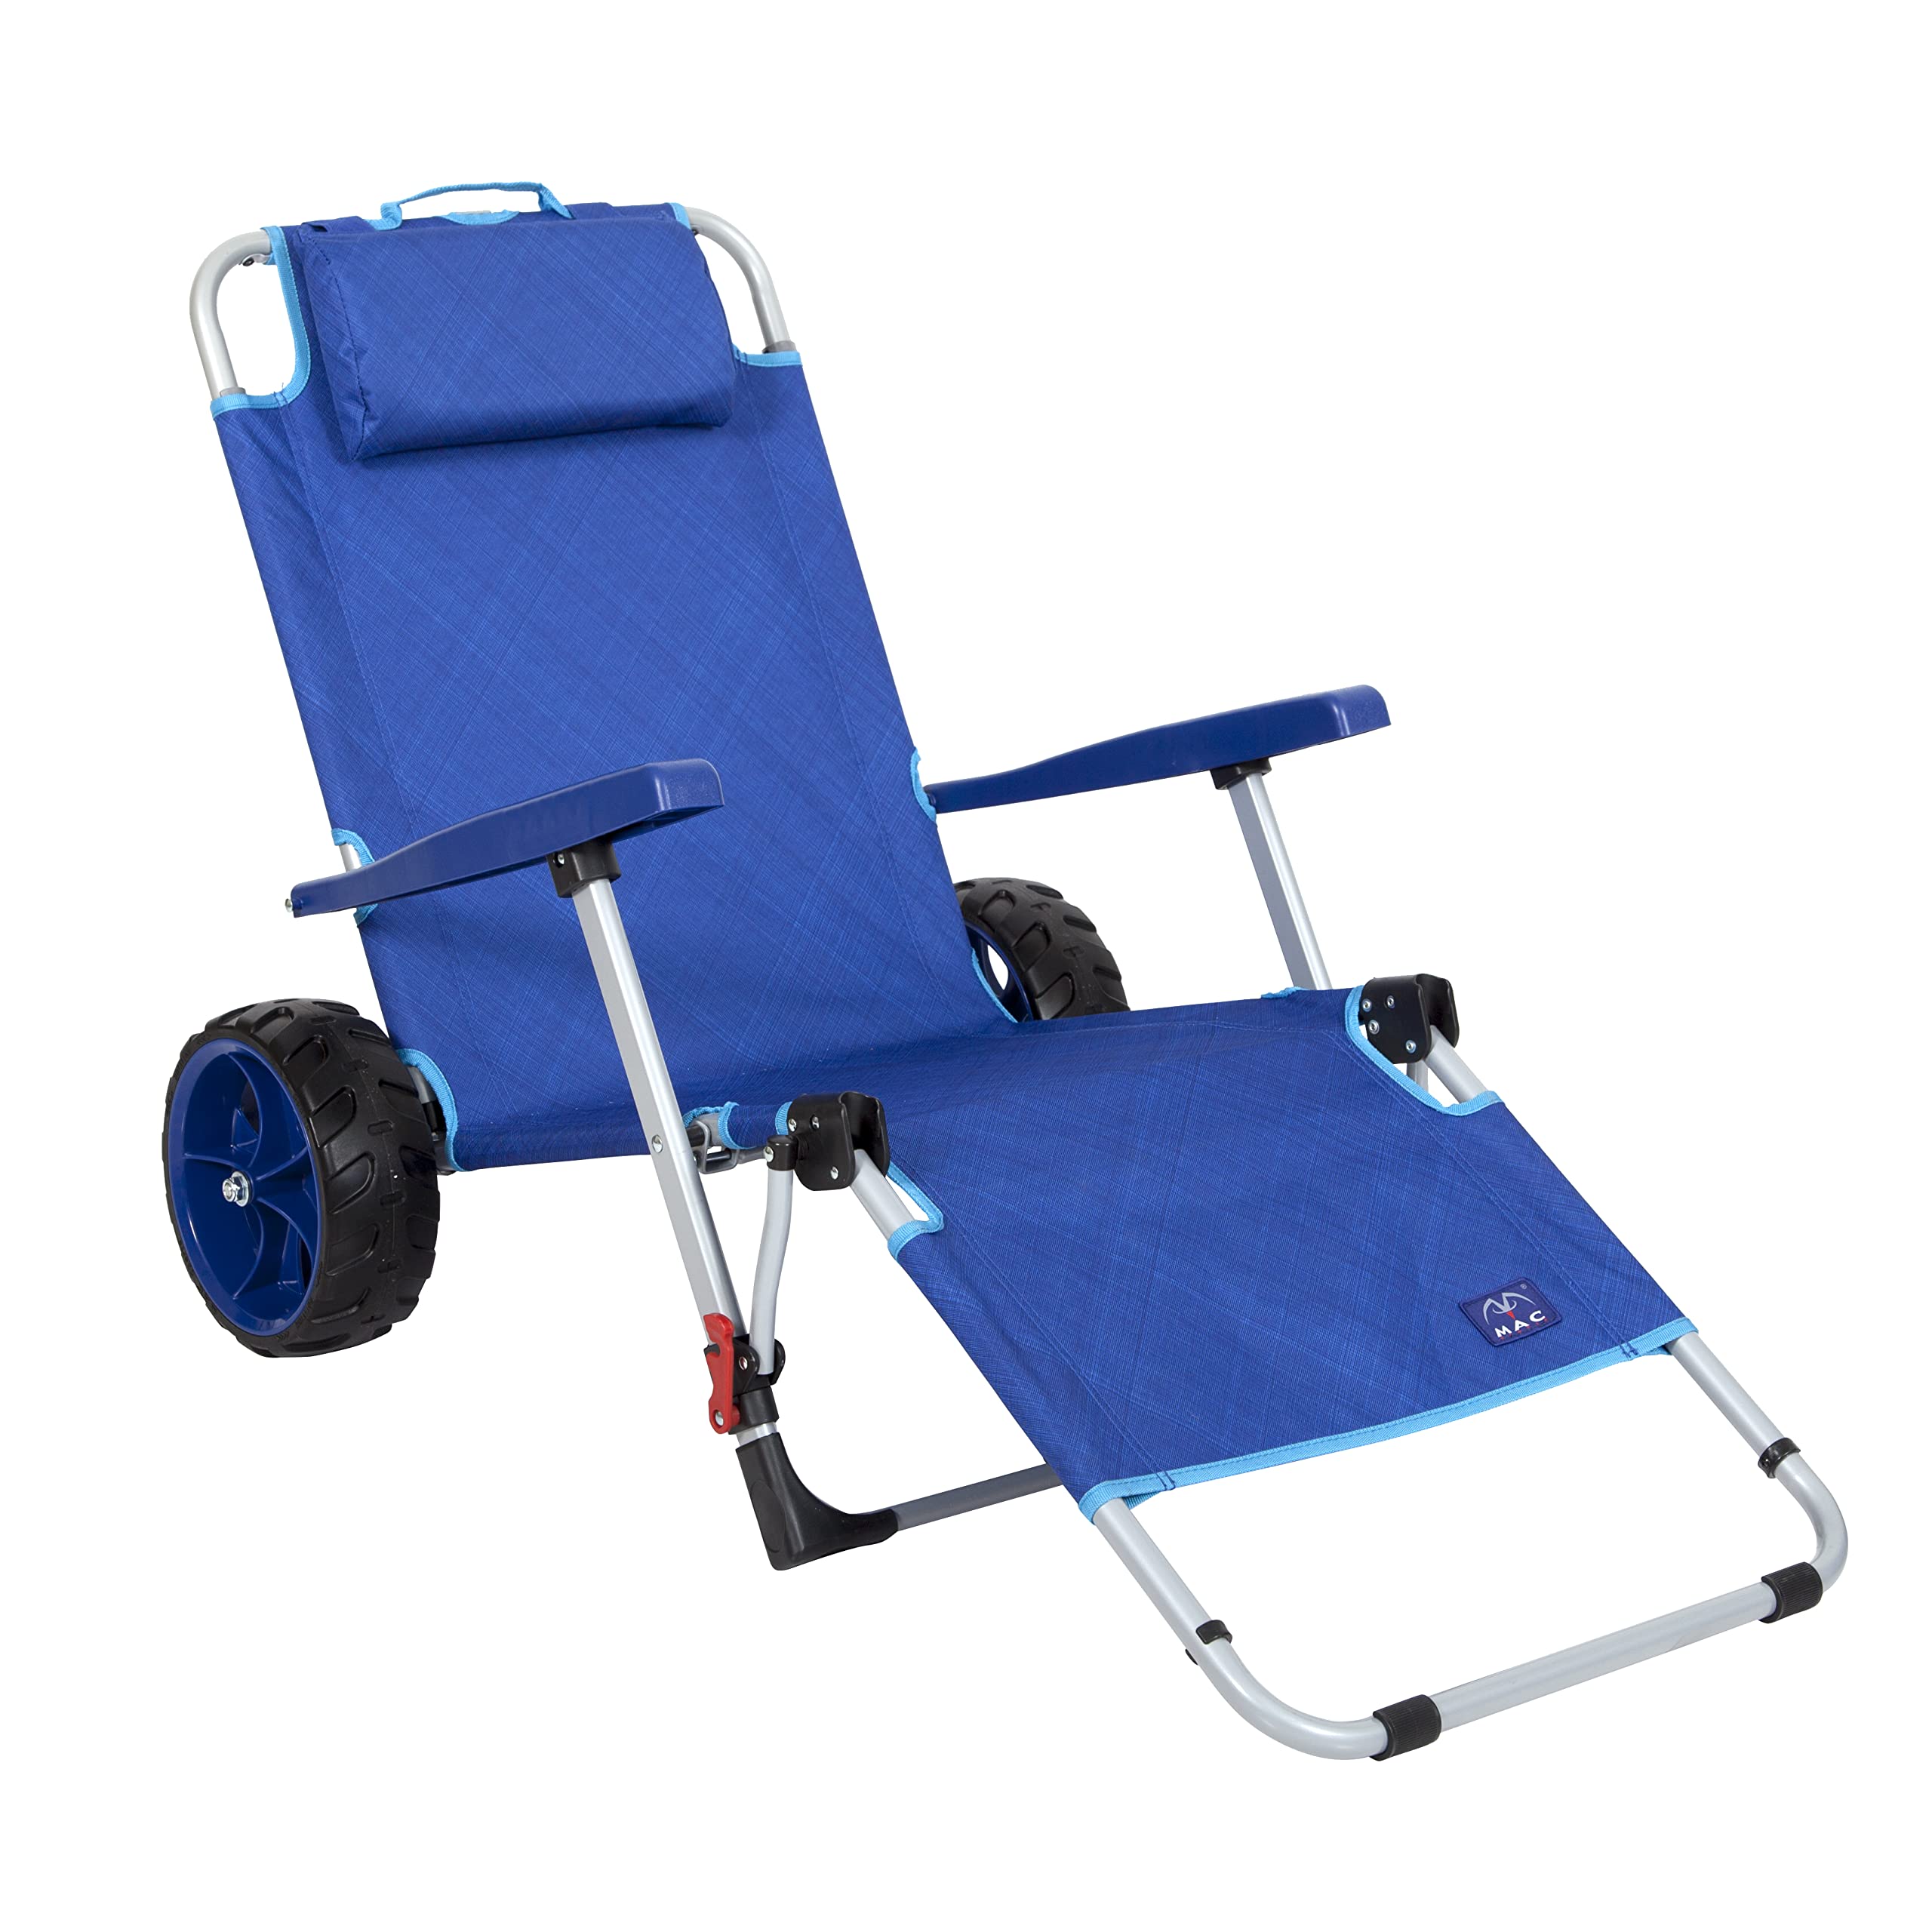 Mac Sports Beach Day Foldable Chaise Lounge Chair with Integrated Wagon Pull Cart Combination and Heavy Wheels - Perfect for Beach, Backyard, Pool or Picnic Blue